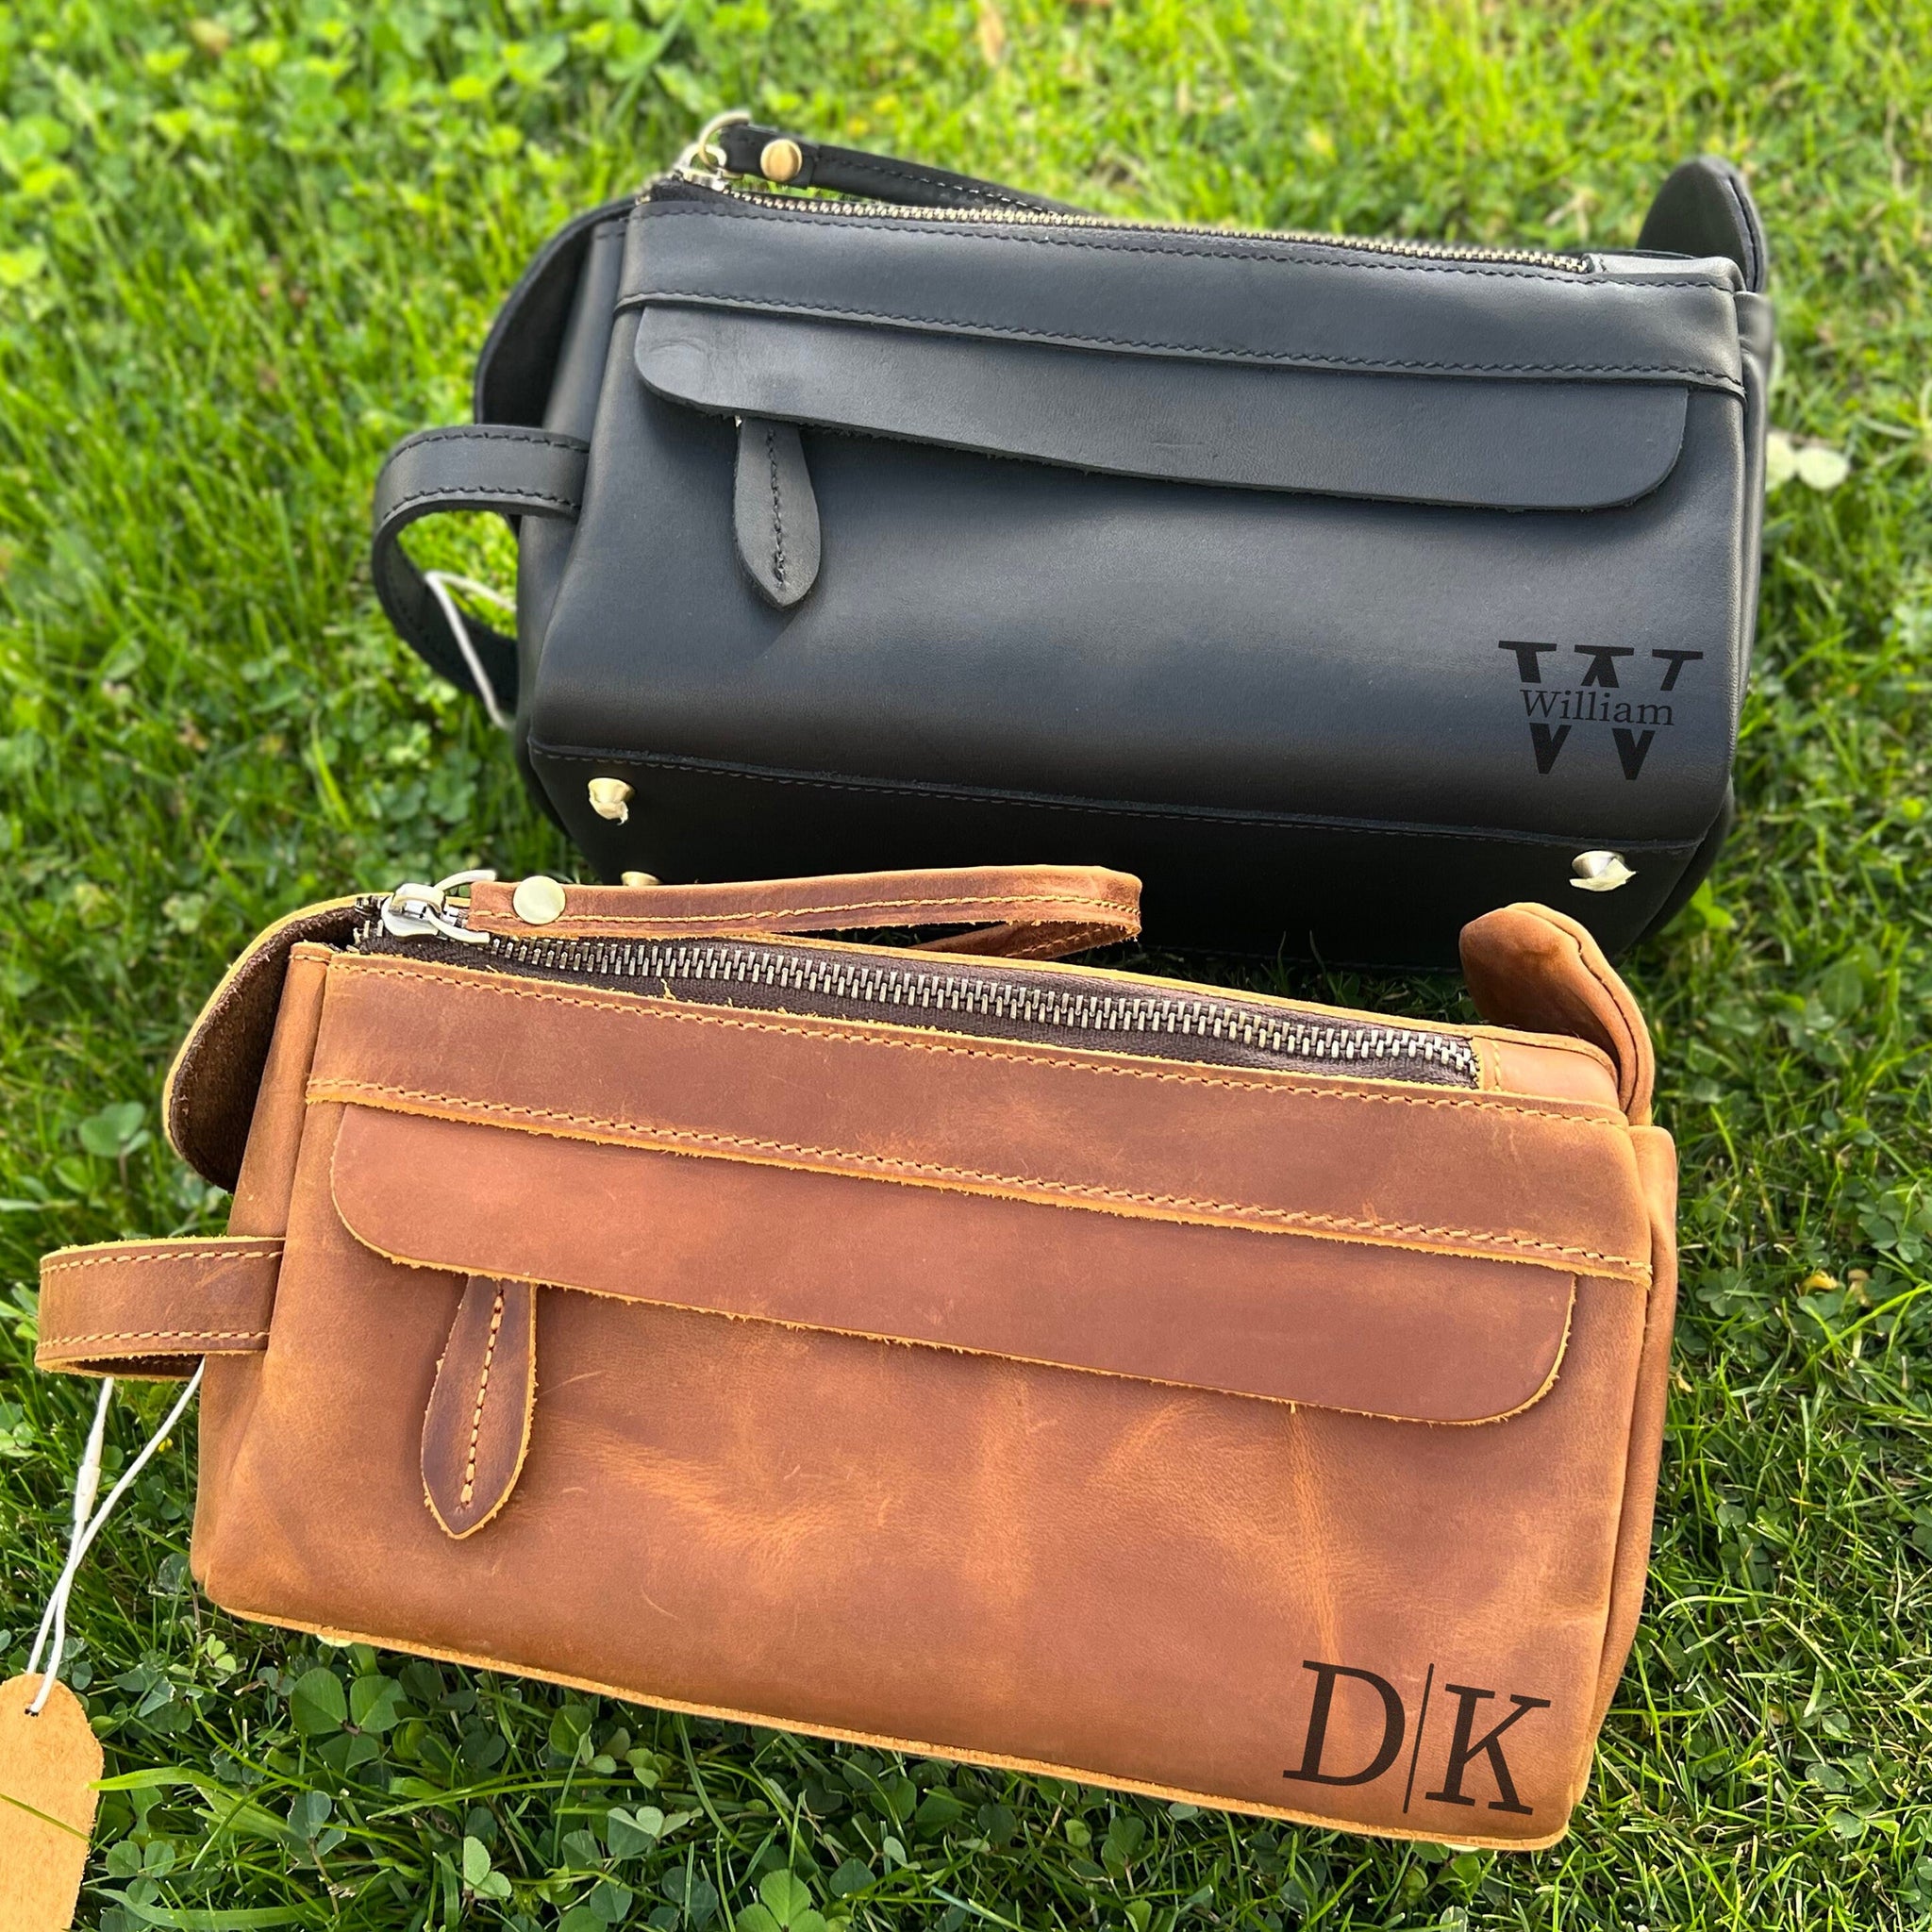 Gizify Leather Toiletry Bag, Gifts For Father, Monogram Travel Bag